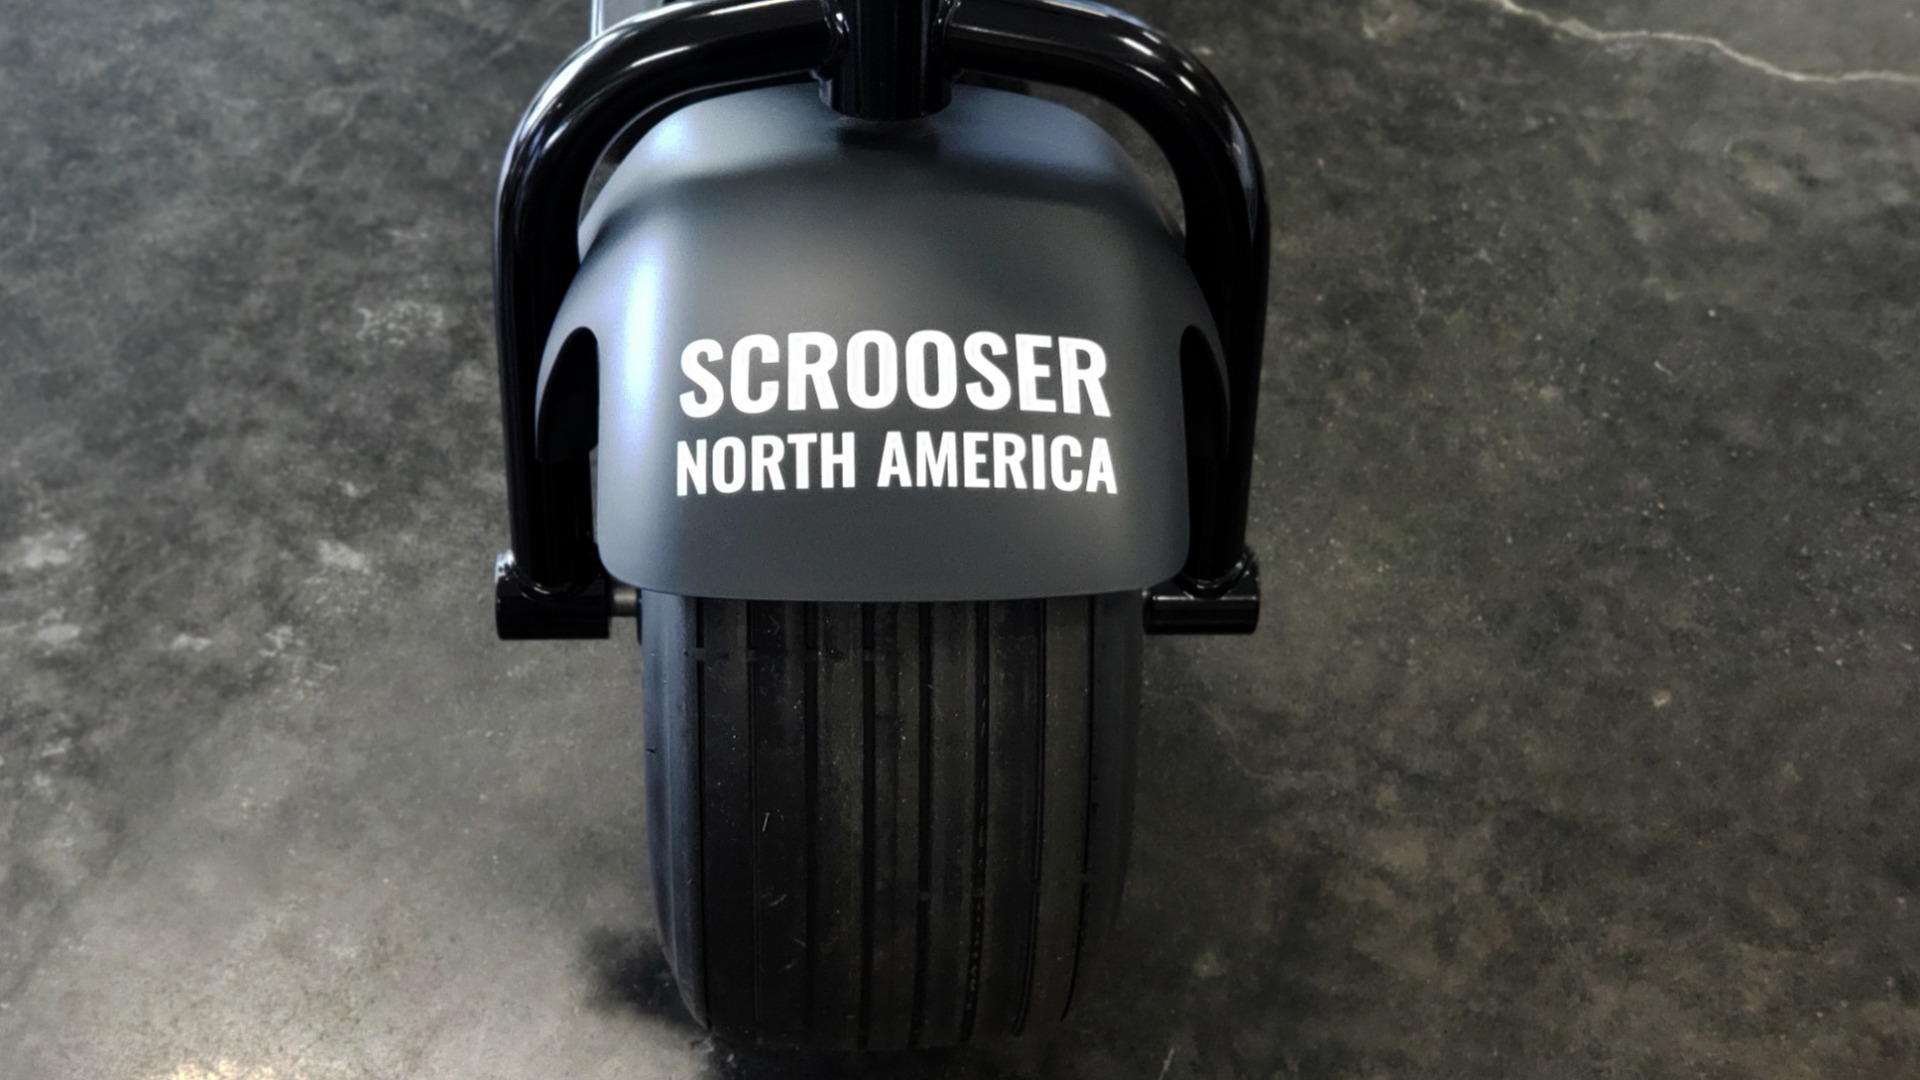 Used 2018 SCROOSER ELECTRIC SCOOTER SELF BALANCED / PITCH BLACK / 15.5 MPH / 34 MI RANGE for sale Sold at Formula Imports in Charlotte NC 28227 3